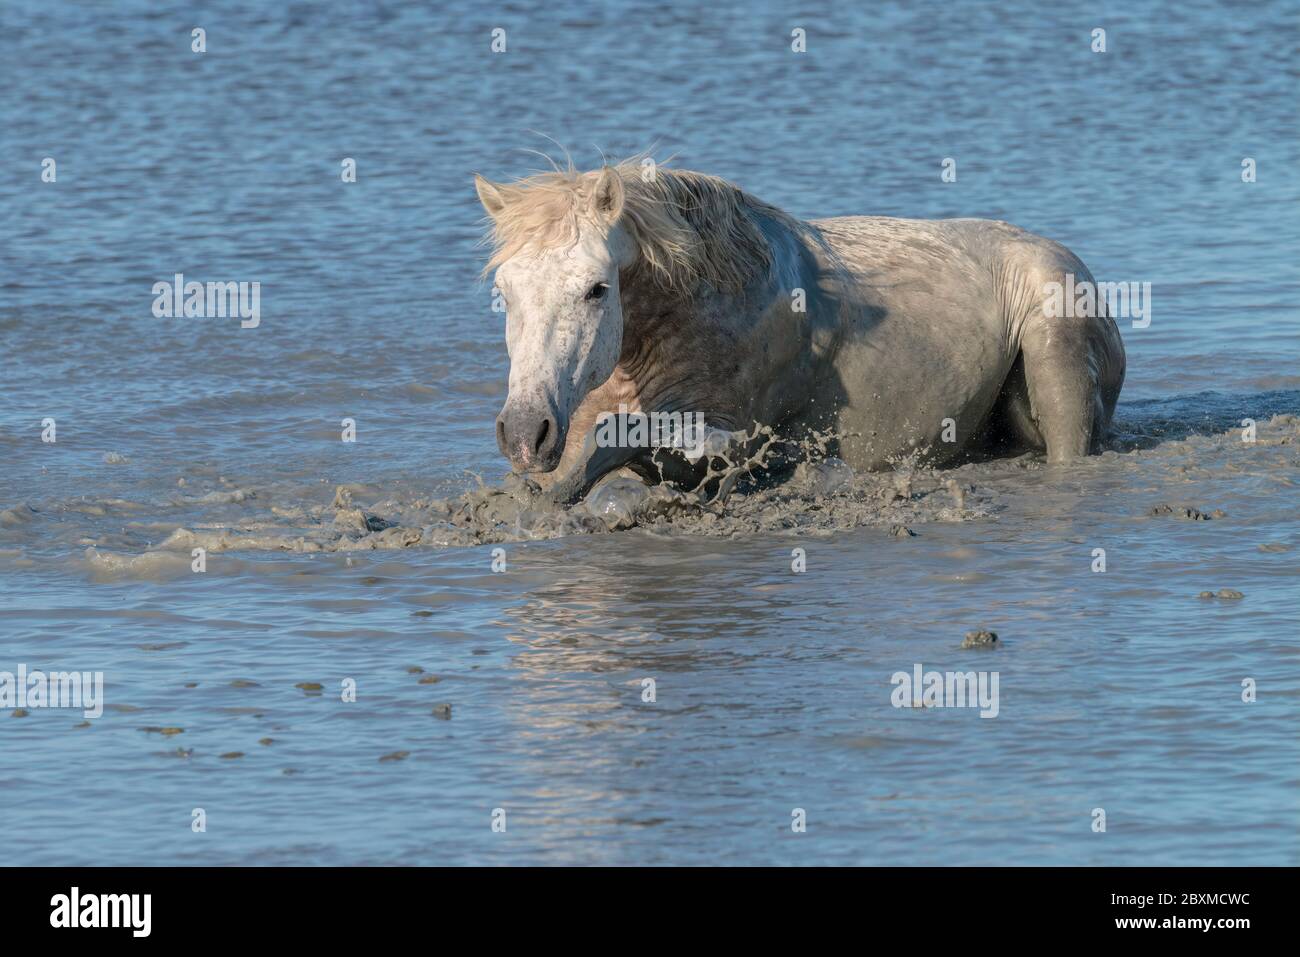 White horse running through the ocean surf in Camargue, France Stock Photo